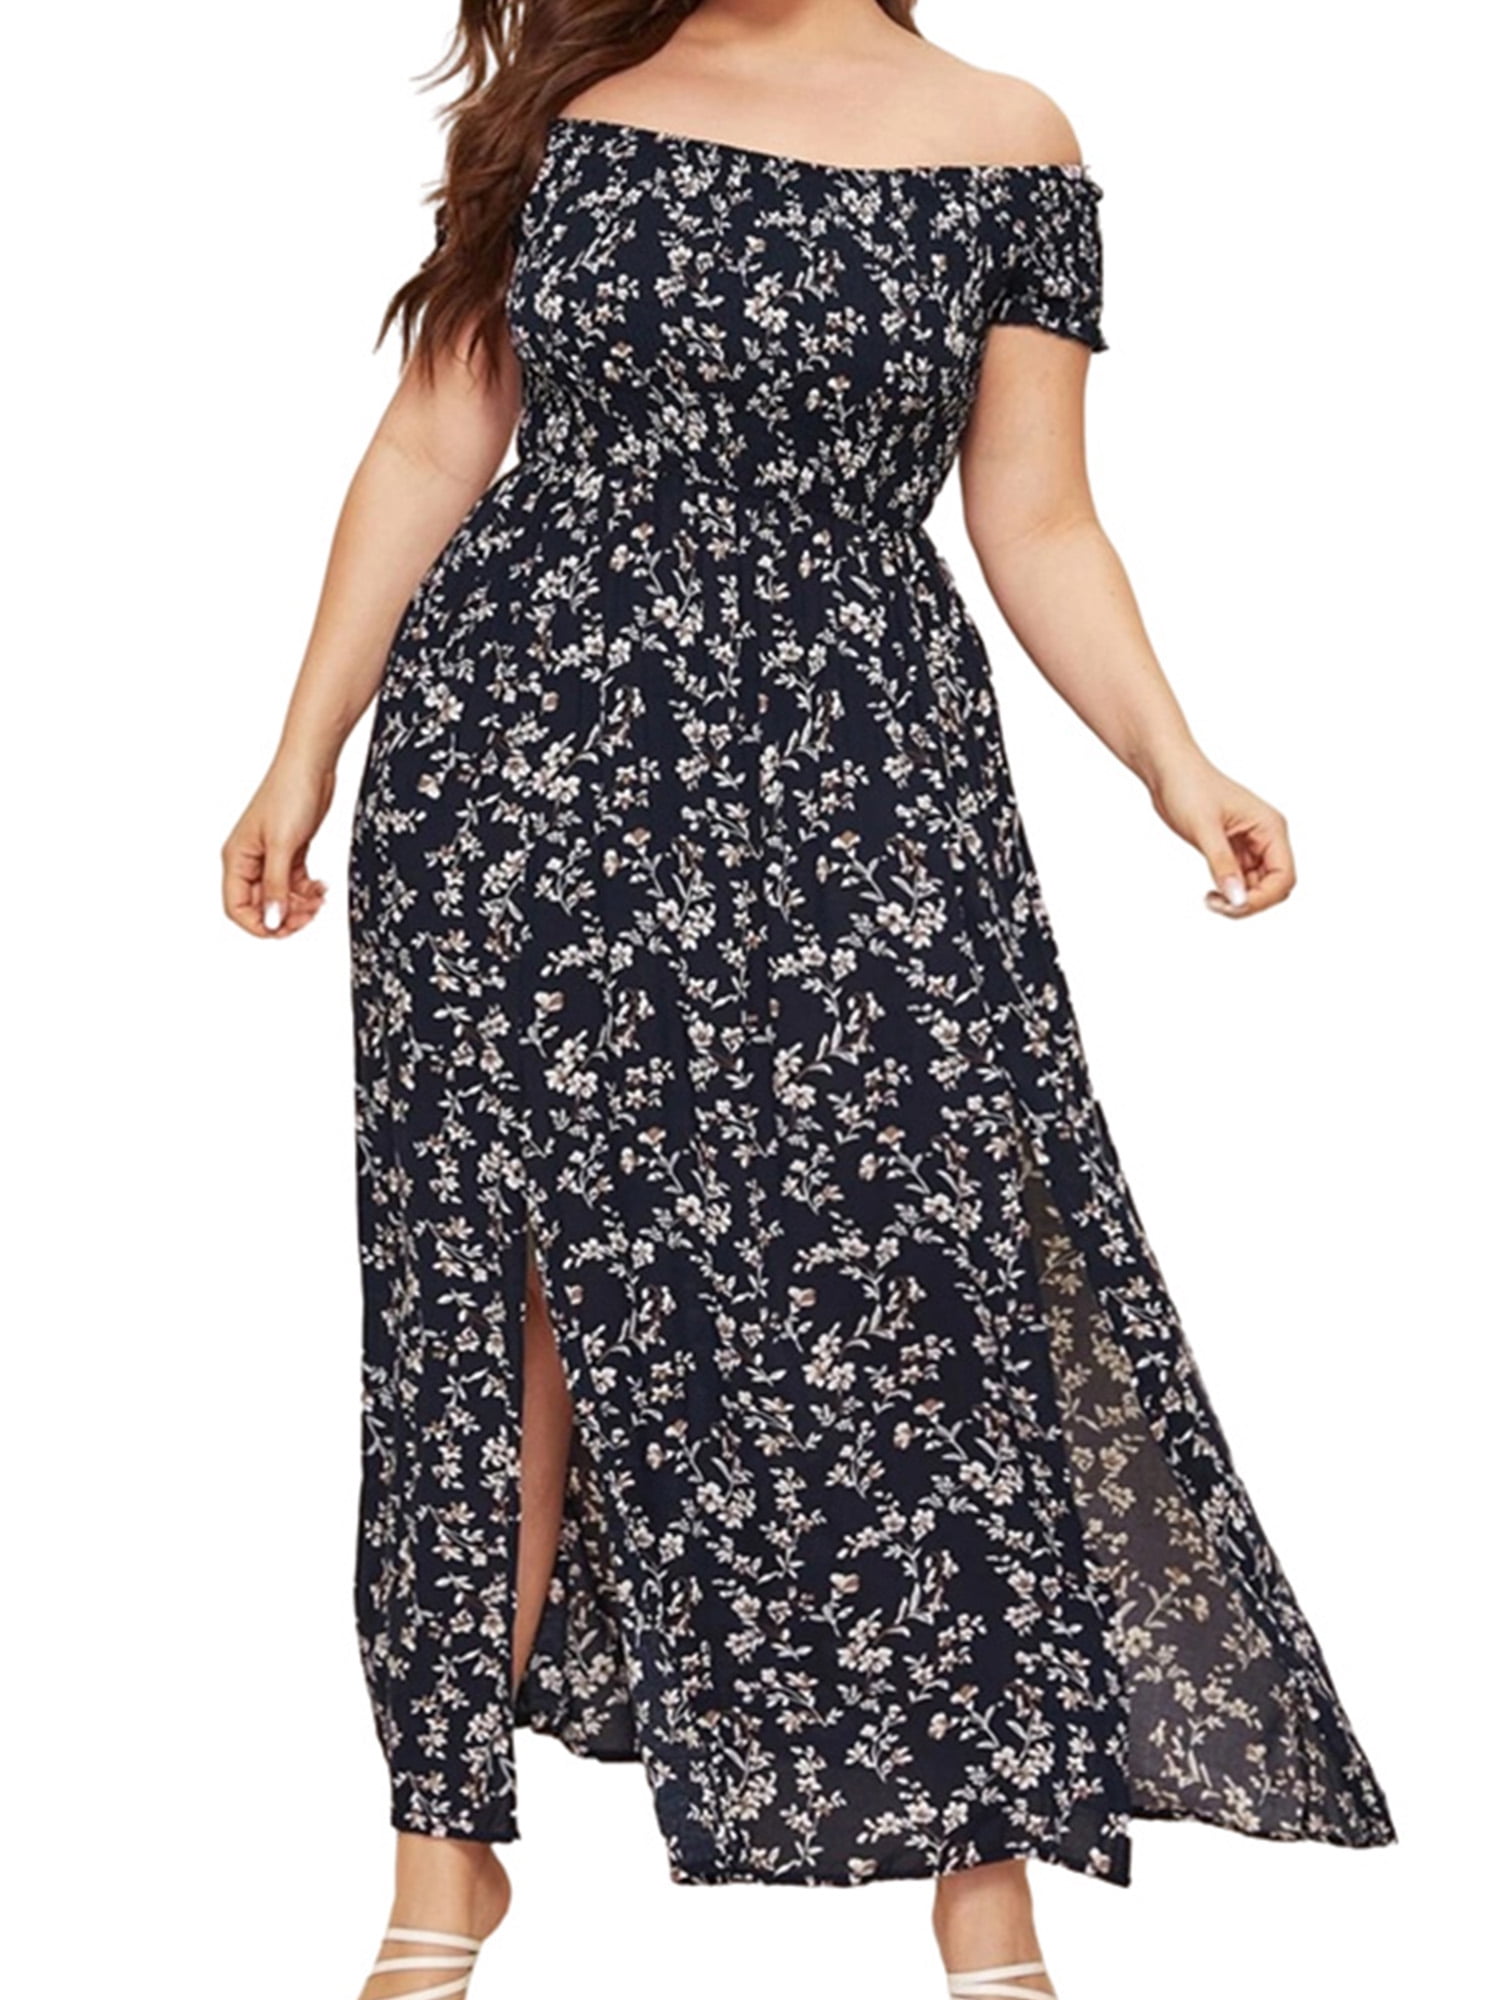 Dresses for Women Boho Floral Maxi Dress Short Sleeve Casual Cocktail Party Baggy Long Sundress 